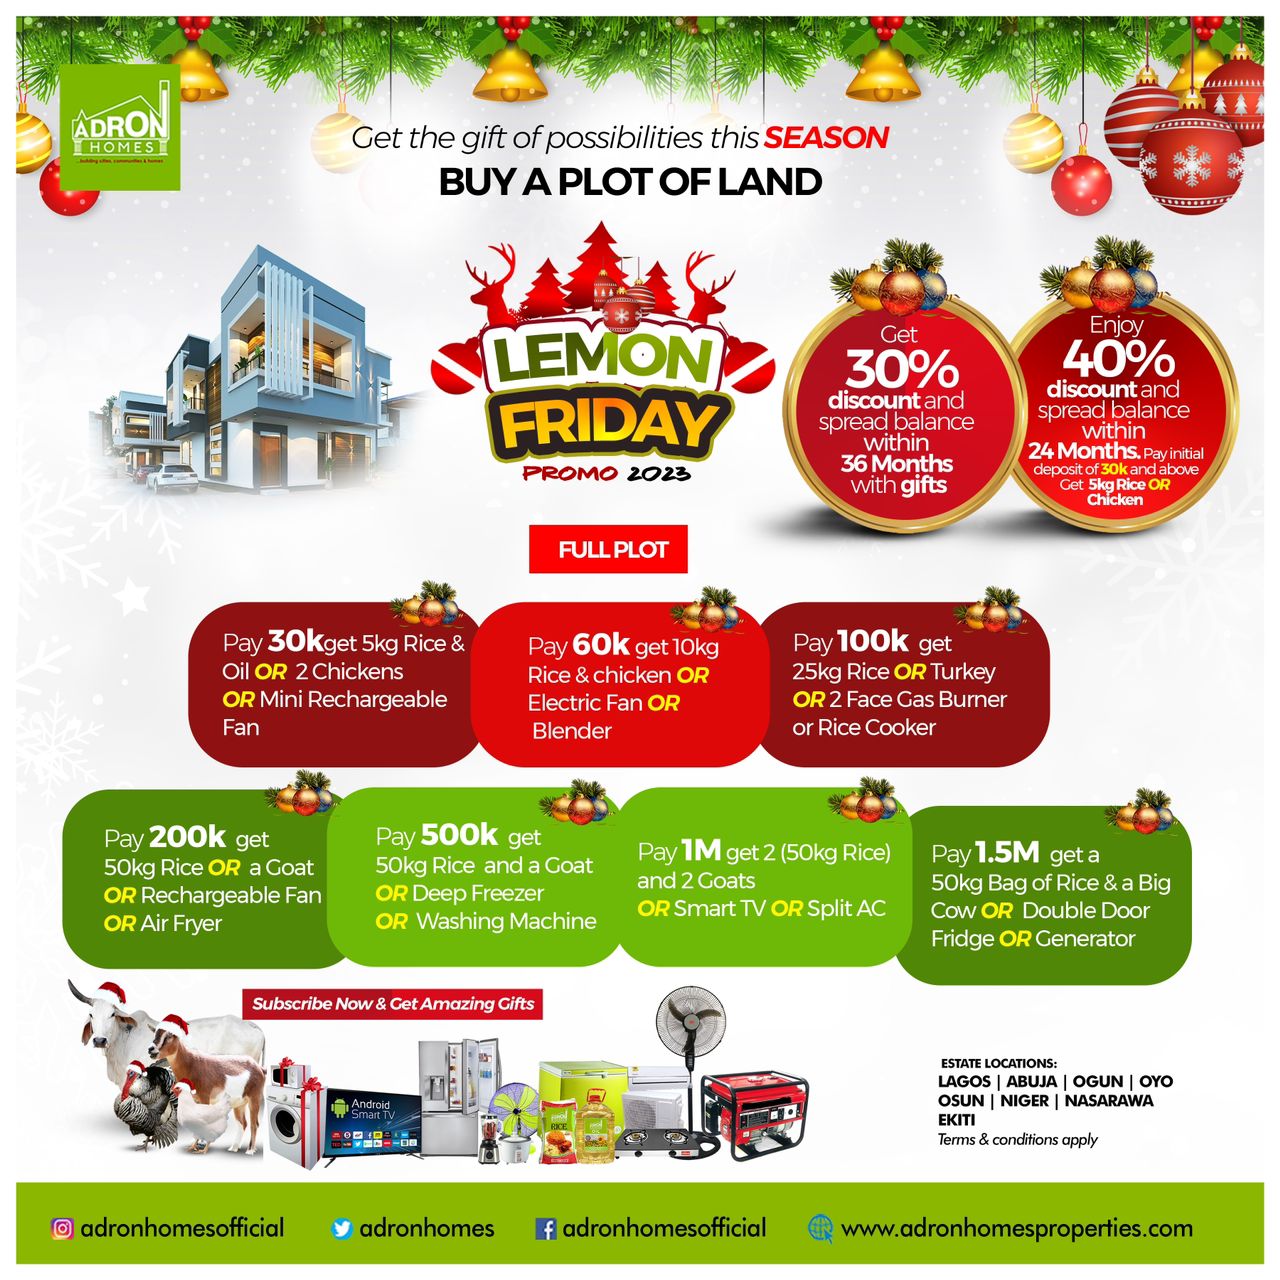 Adron Homes Excites Customers with ‘Lemon Friday Promo’ | Touchaheart news